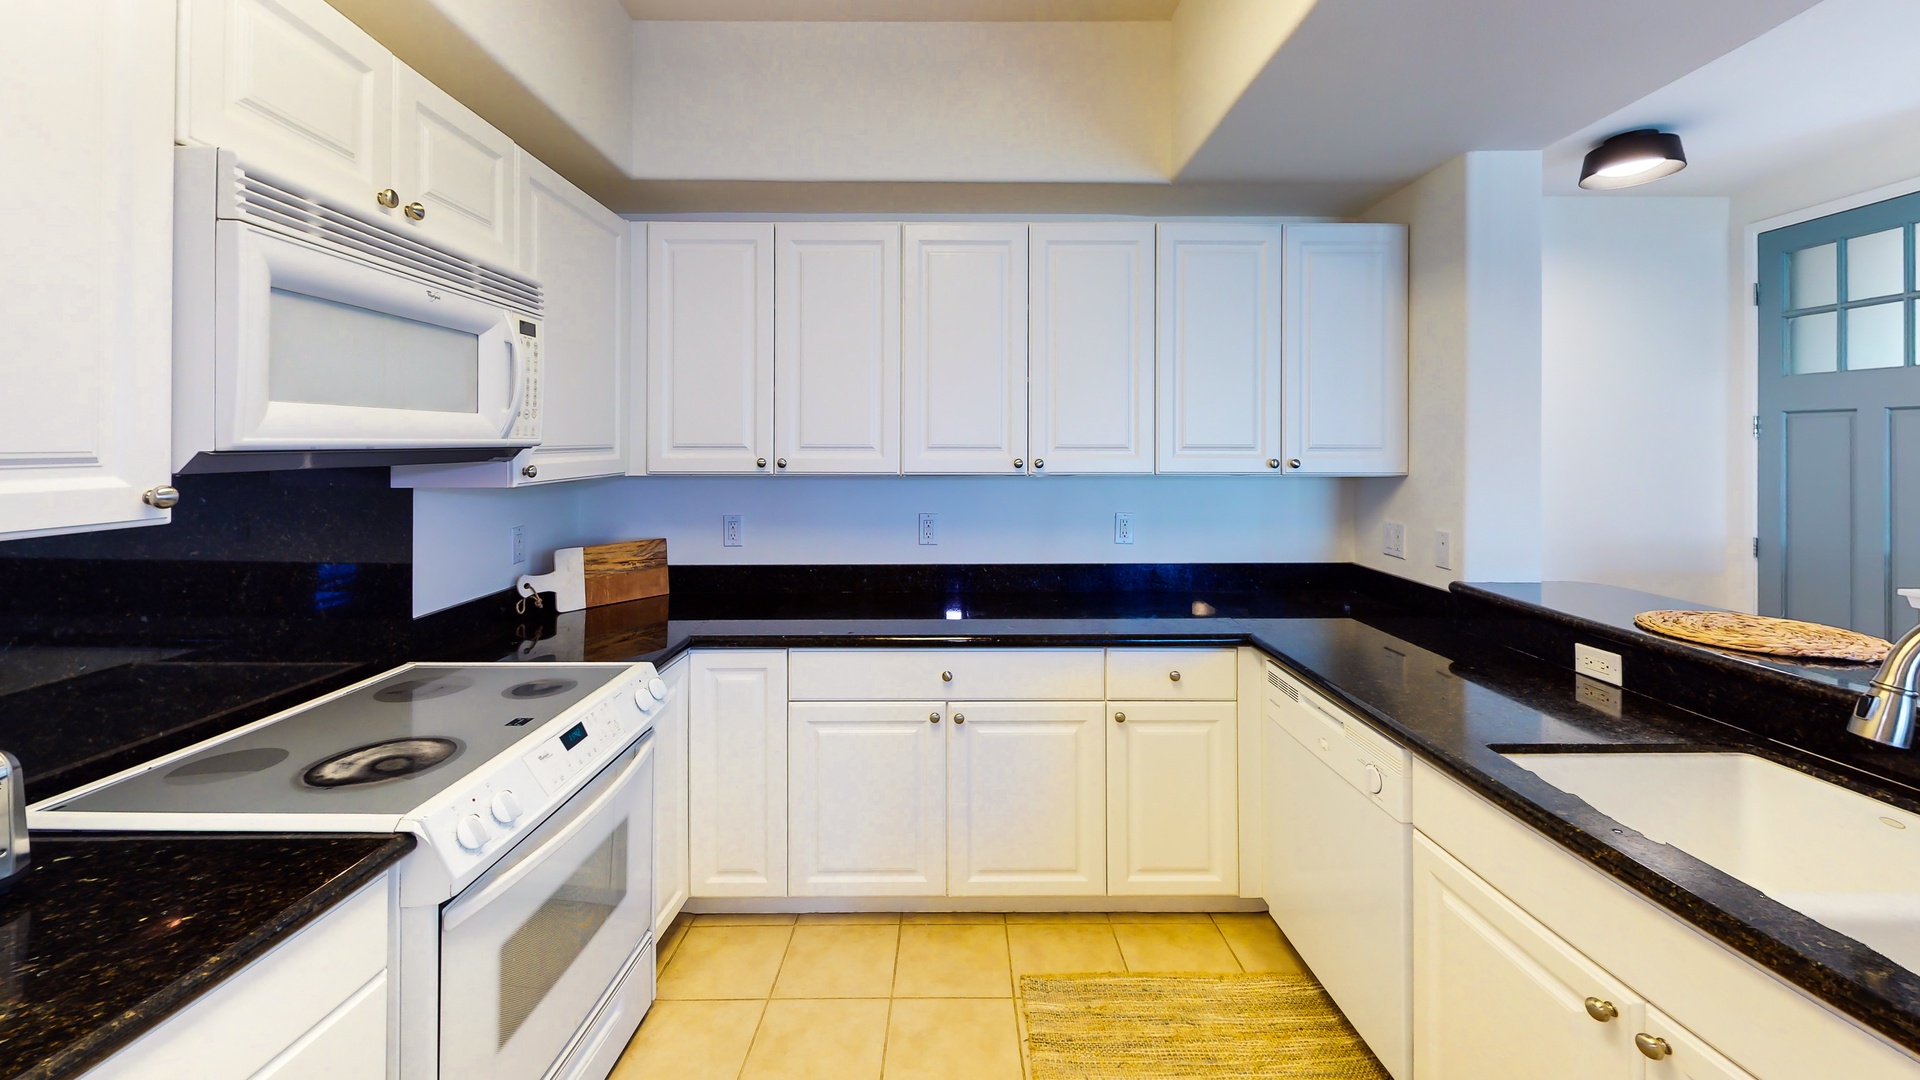 Kapolei Vacation Rentals, Ko Olina Kai 1033A - The spacious kitchen opens up in to the living and dining areas.